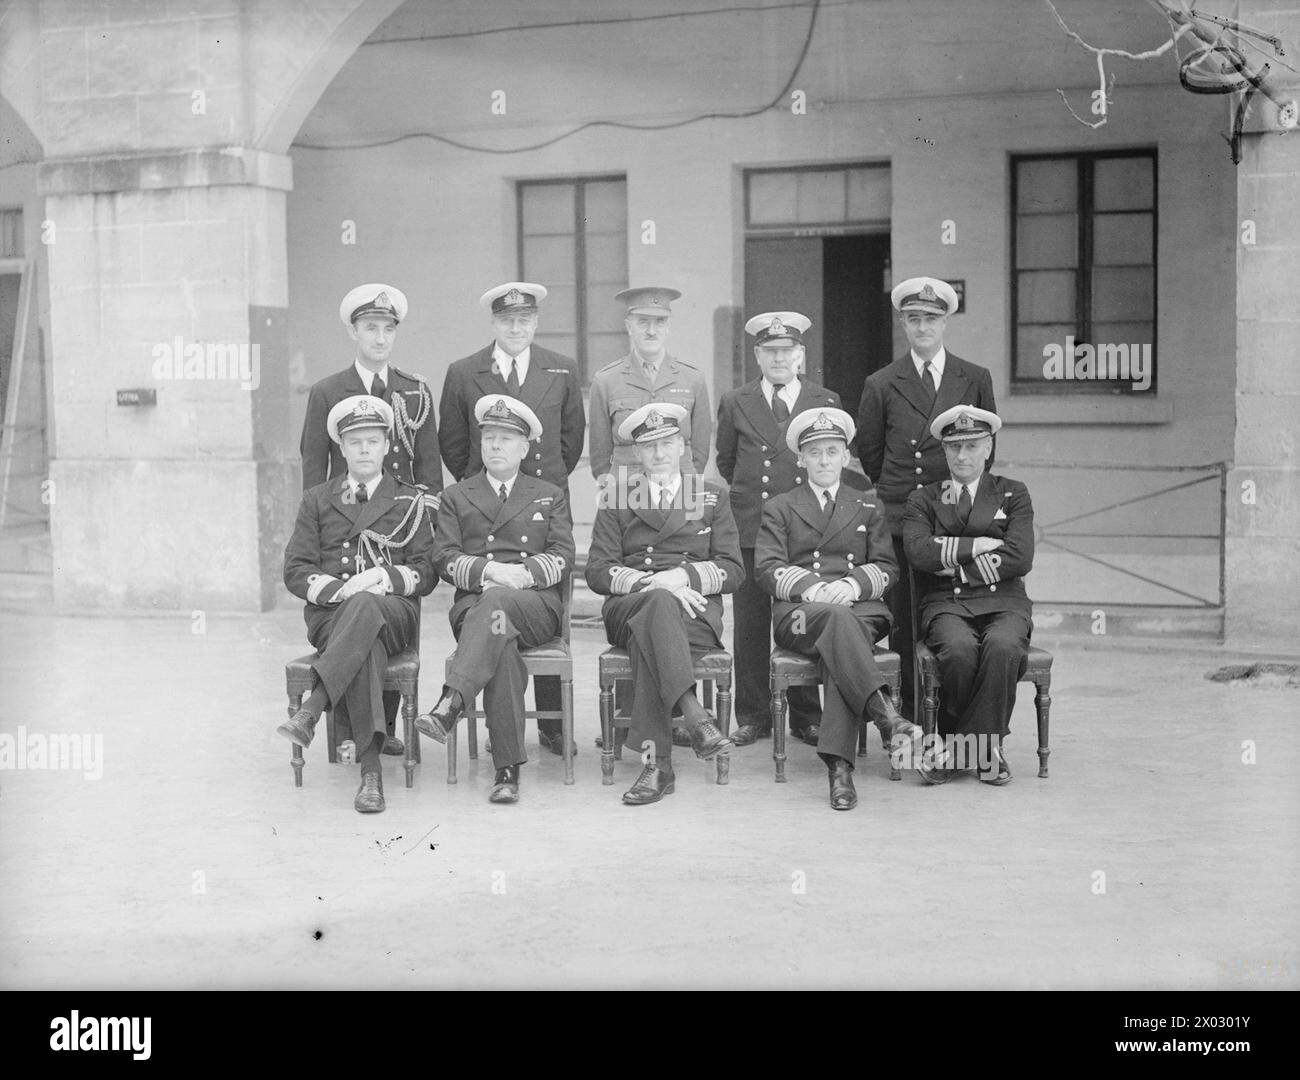 ADMIRAL SIR WILBRAHAM FORD AND HIS STAFF BEFORE HE LEFT MALTA TO BECOME C IN C ROSYTH. 1941, MALTA. - Admiral Sir Wilbraham Ford with a group of Naval Officers at Malta. Left to right: back row: Lieut Cdr W H B Wallace; Lieut Cdr H R B Howell; Major O E Haworth-Booth, RM; Lieut Cdr G Finley-Day; Commander M J Evans. Front Row: Pay Cdr R H Johnson; Captain G W Wadham, Chief of Staff; Admiral Sir Wilbraham Ford, KCB, KBE; Eng Captain H E Lewis; Commander P H Calderson Stock Photo